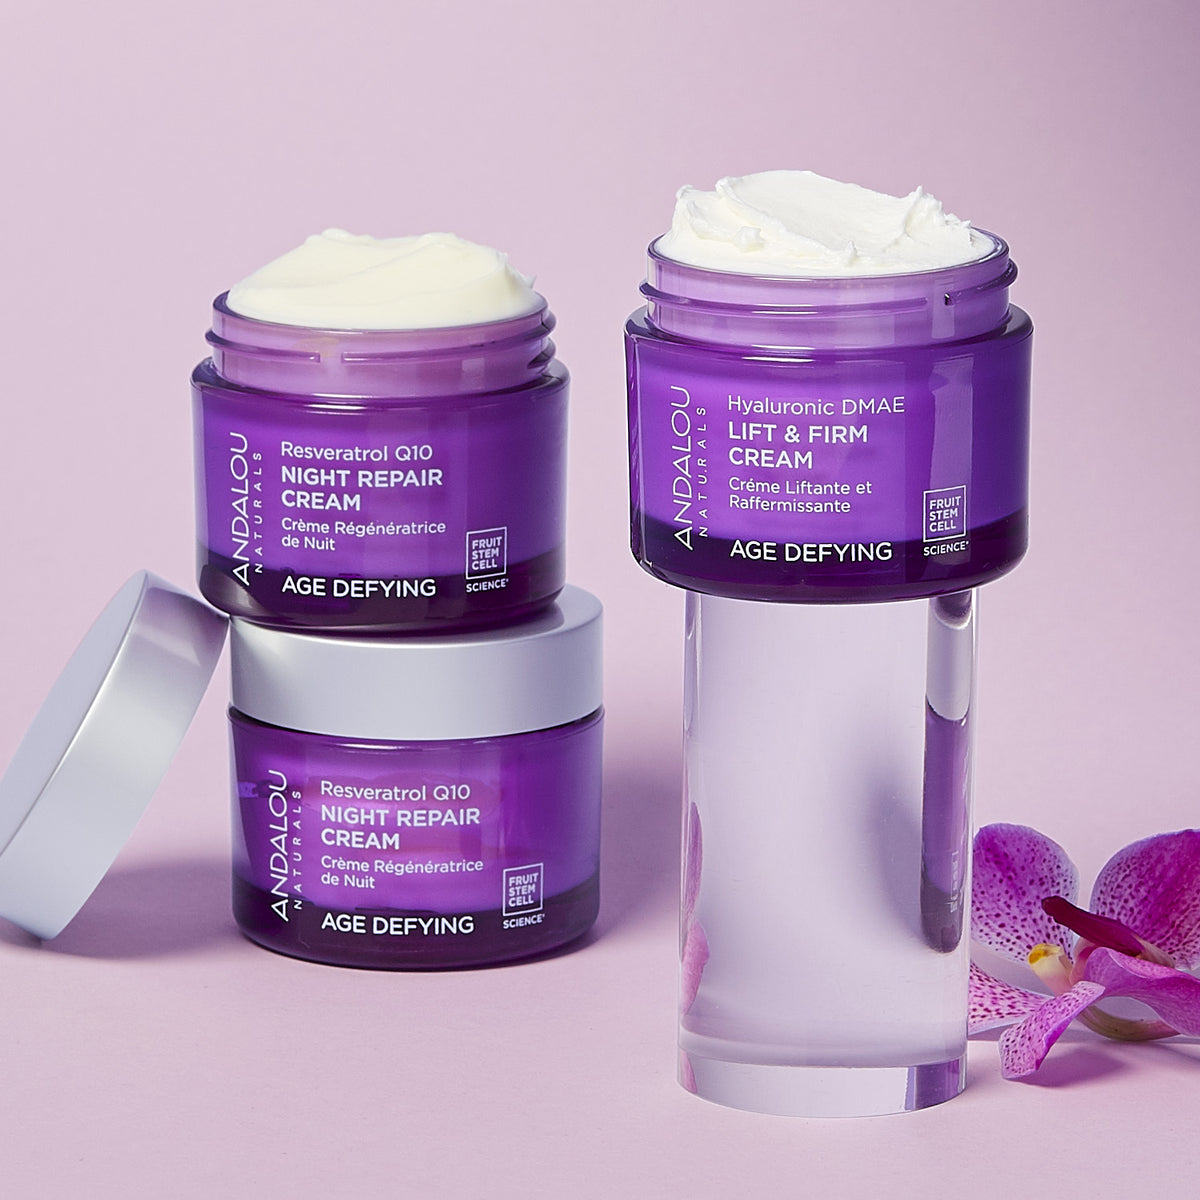 Age Defying Day to Night Bundle - Andalou Naturals US